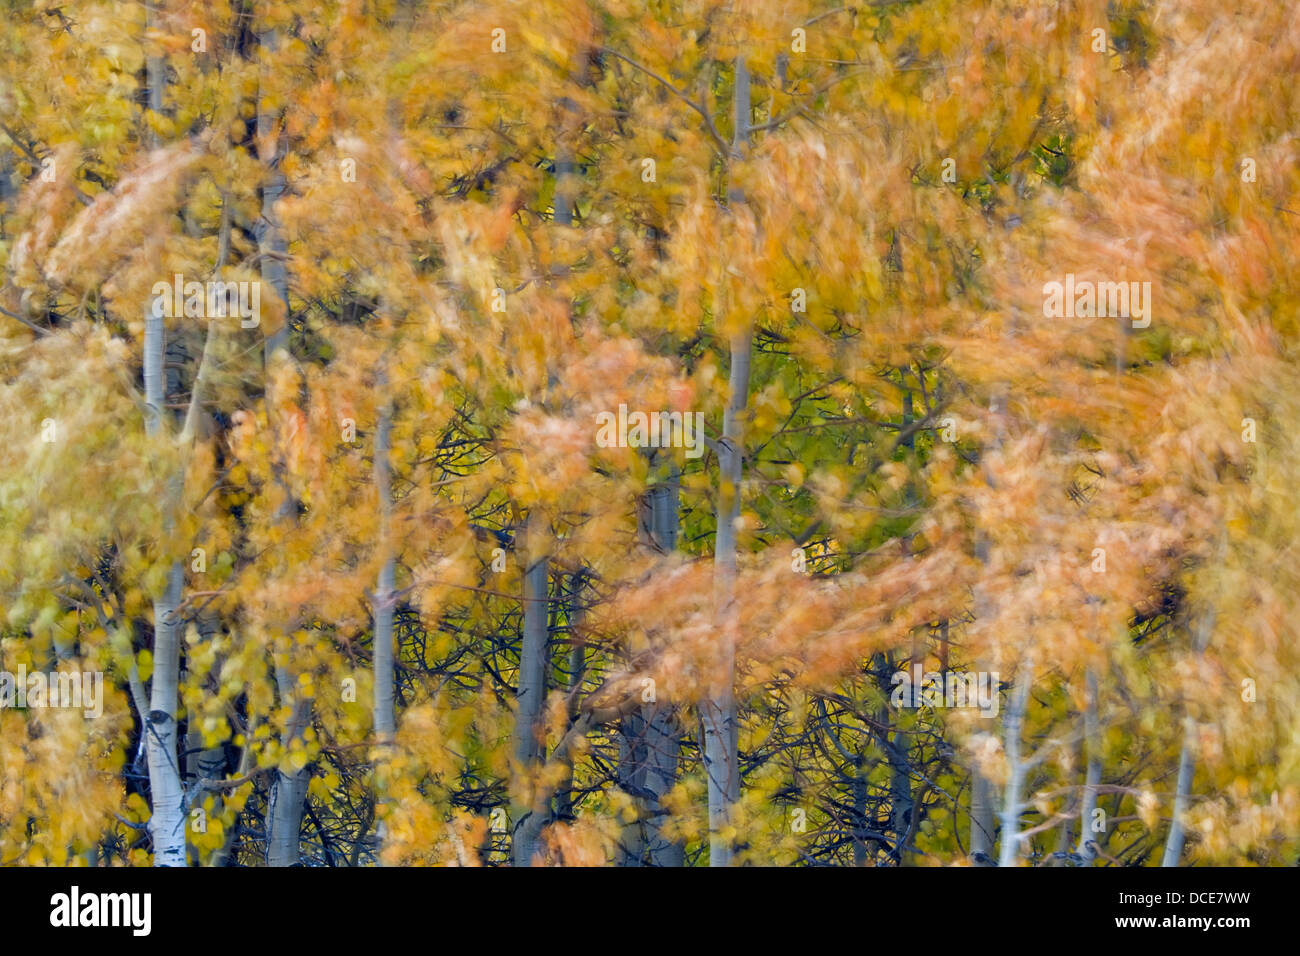 Aspen trees and leaves blowing in the wind, Bishop Creek Canyon, Eastern Sierra, California Stock Photo